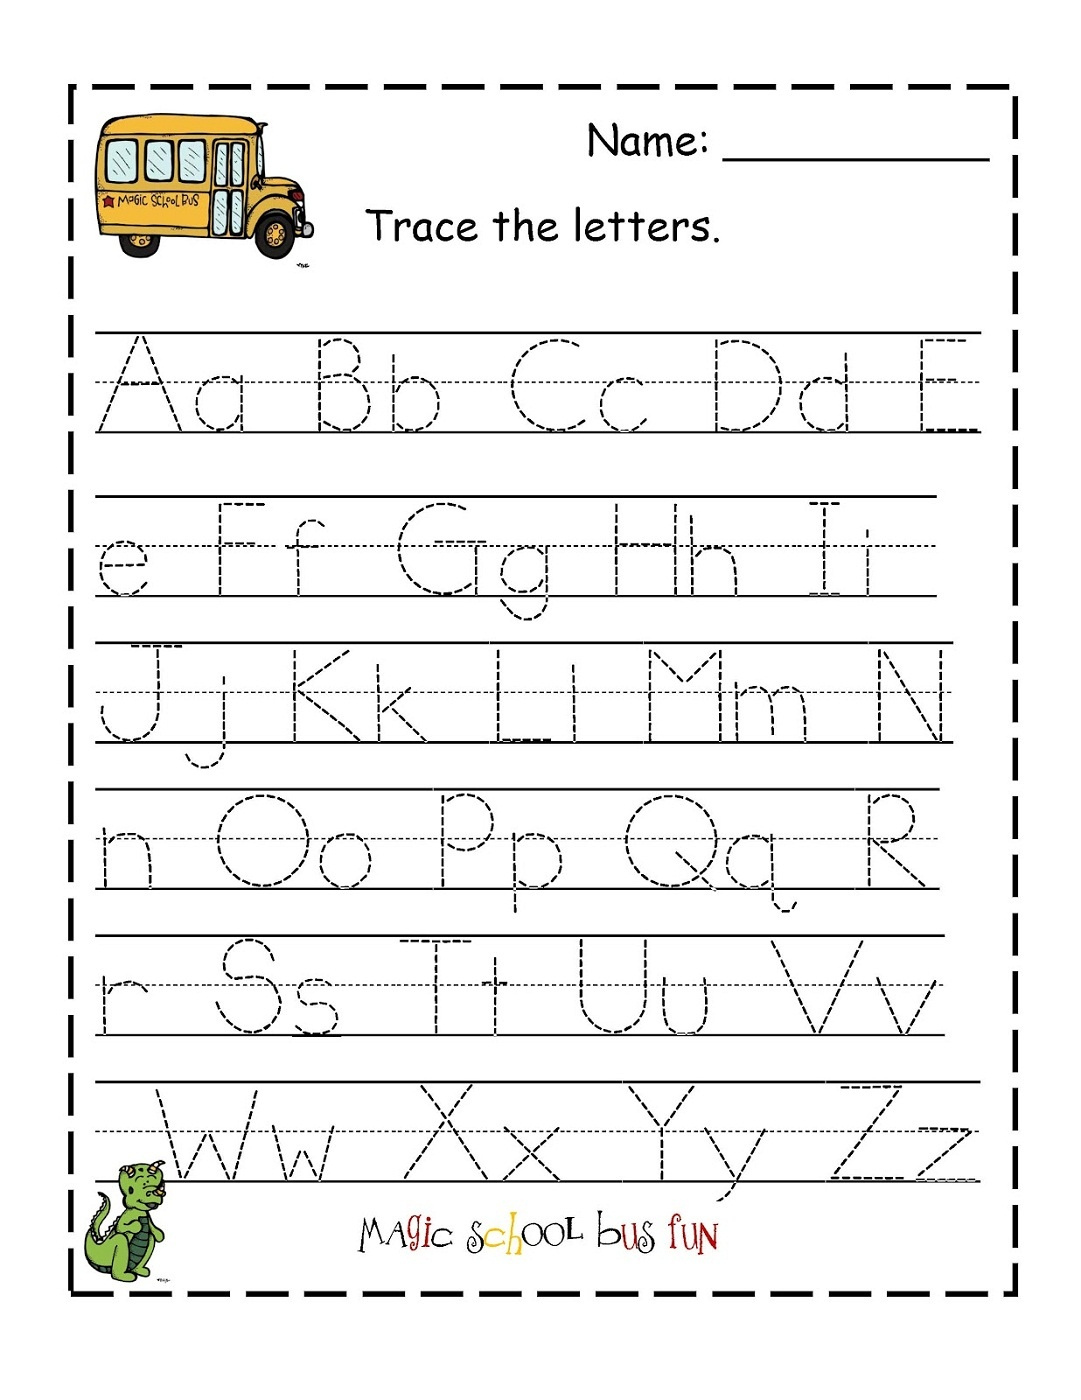 Tracing Papers For Kindergarten Kaza psstech co Free Printable 